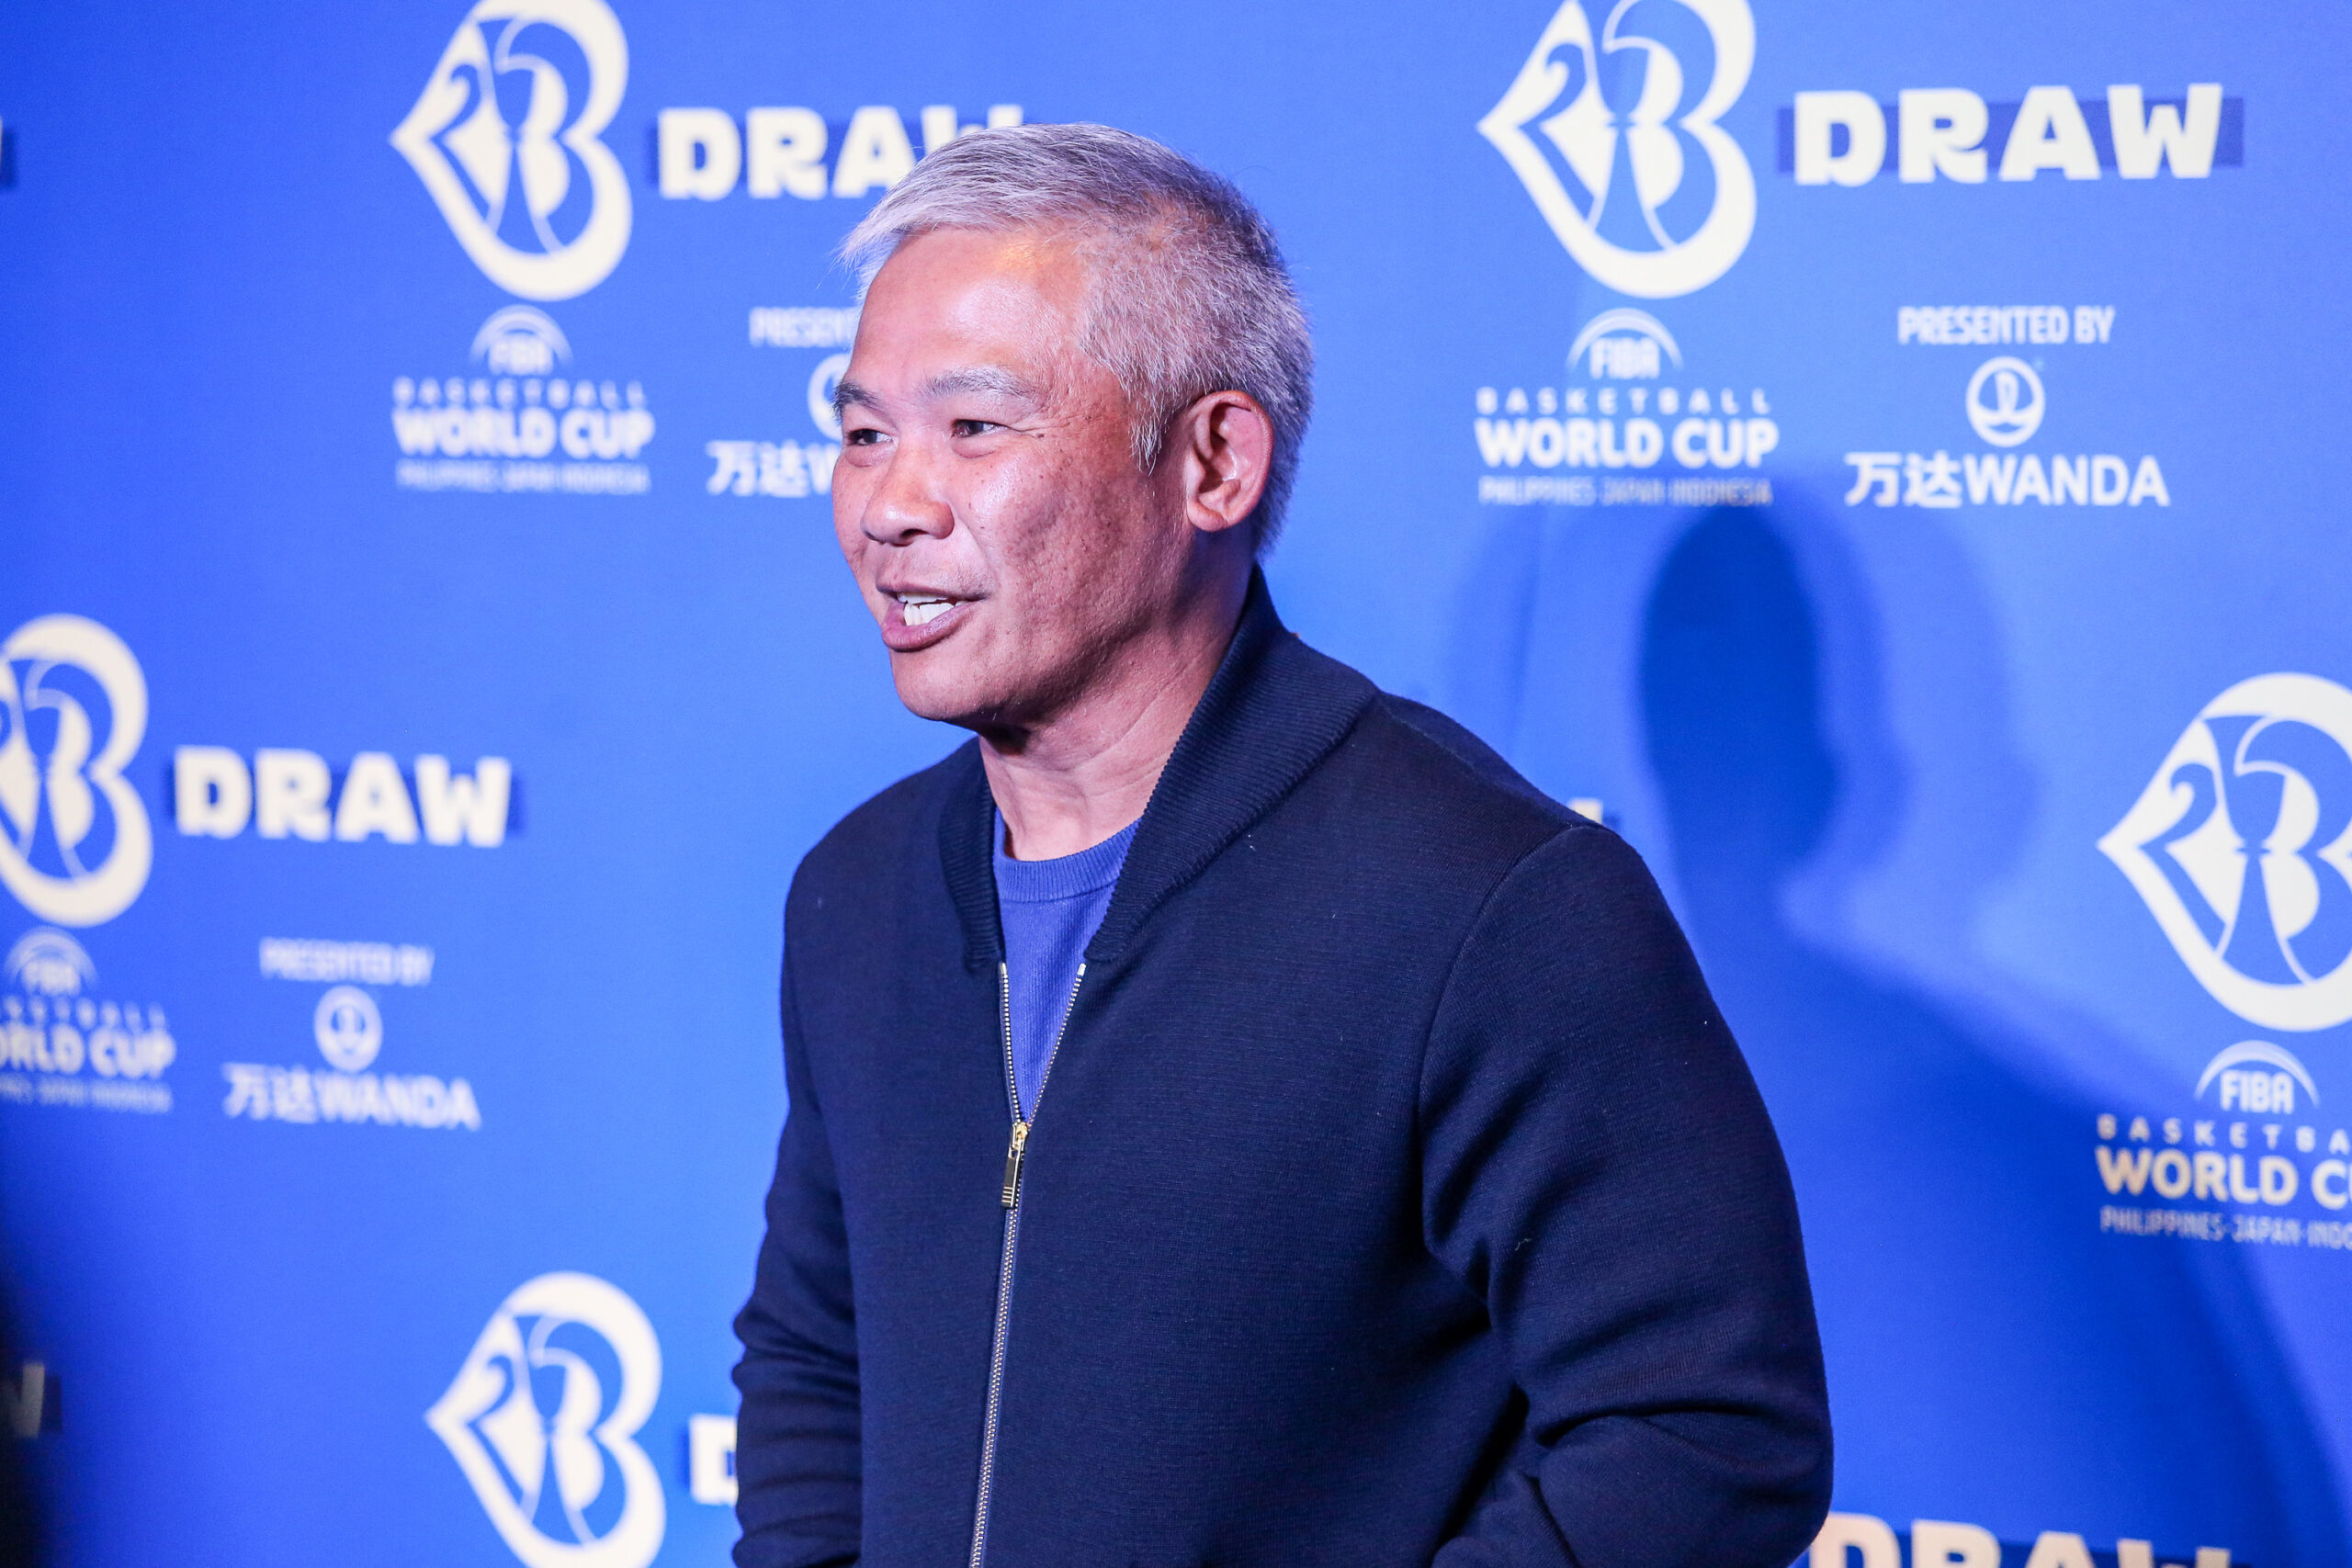 Gilas Pilipinas coaches Chot Reyes before the Fiba World Cup 2023 draw.  – MARLO CUETO/INQUIRER.net